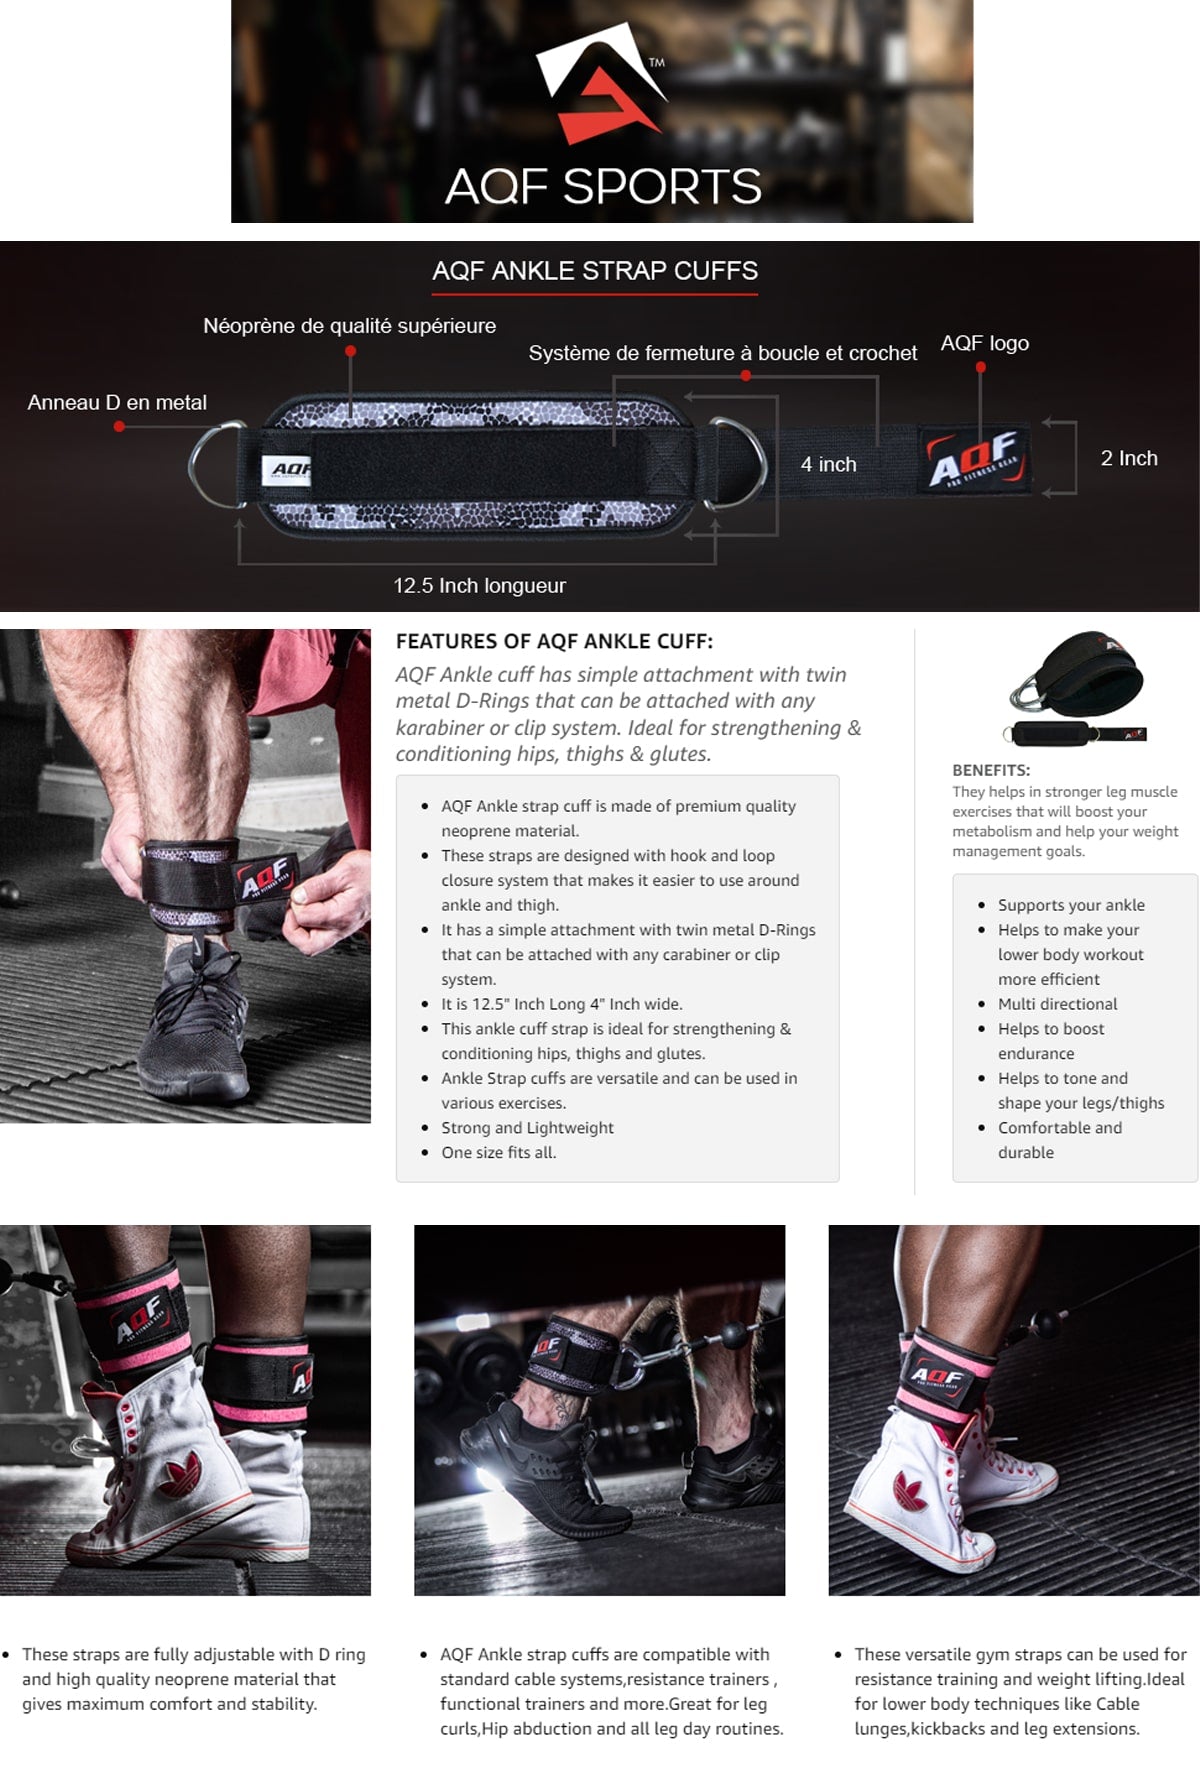 Features of AQF Ankle Strap